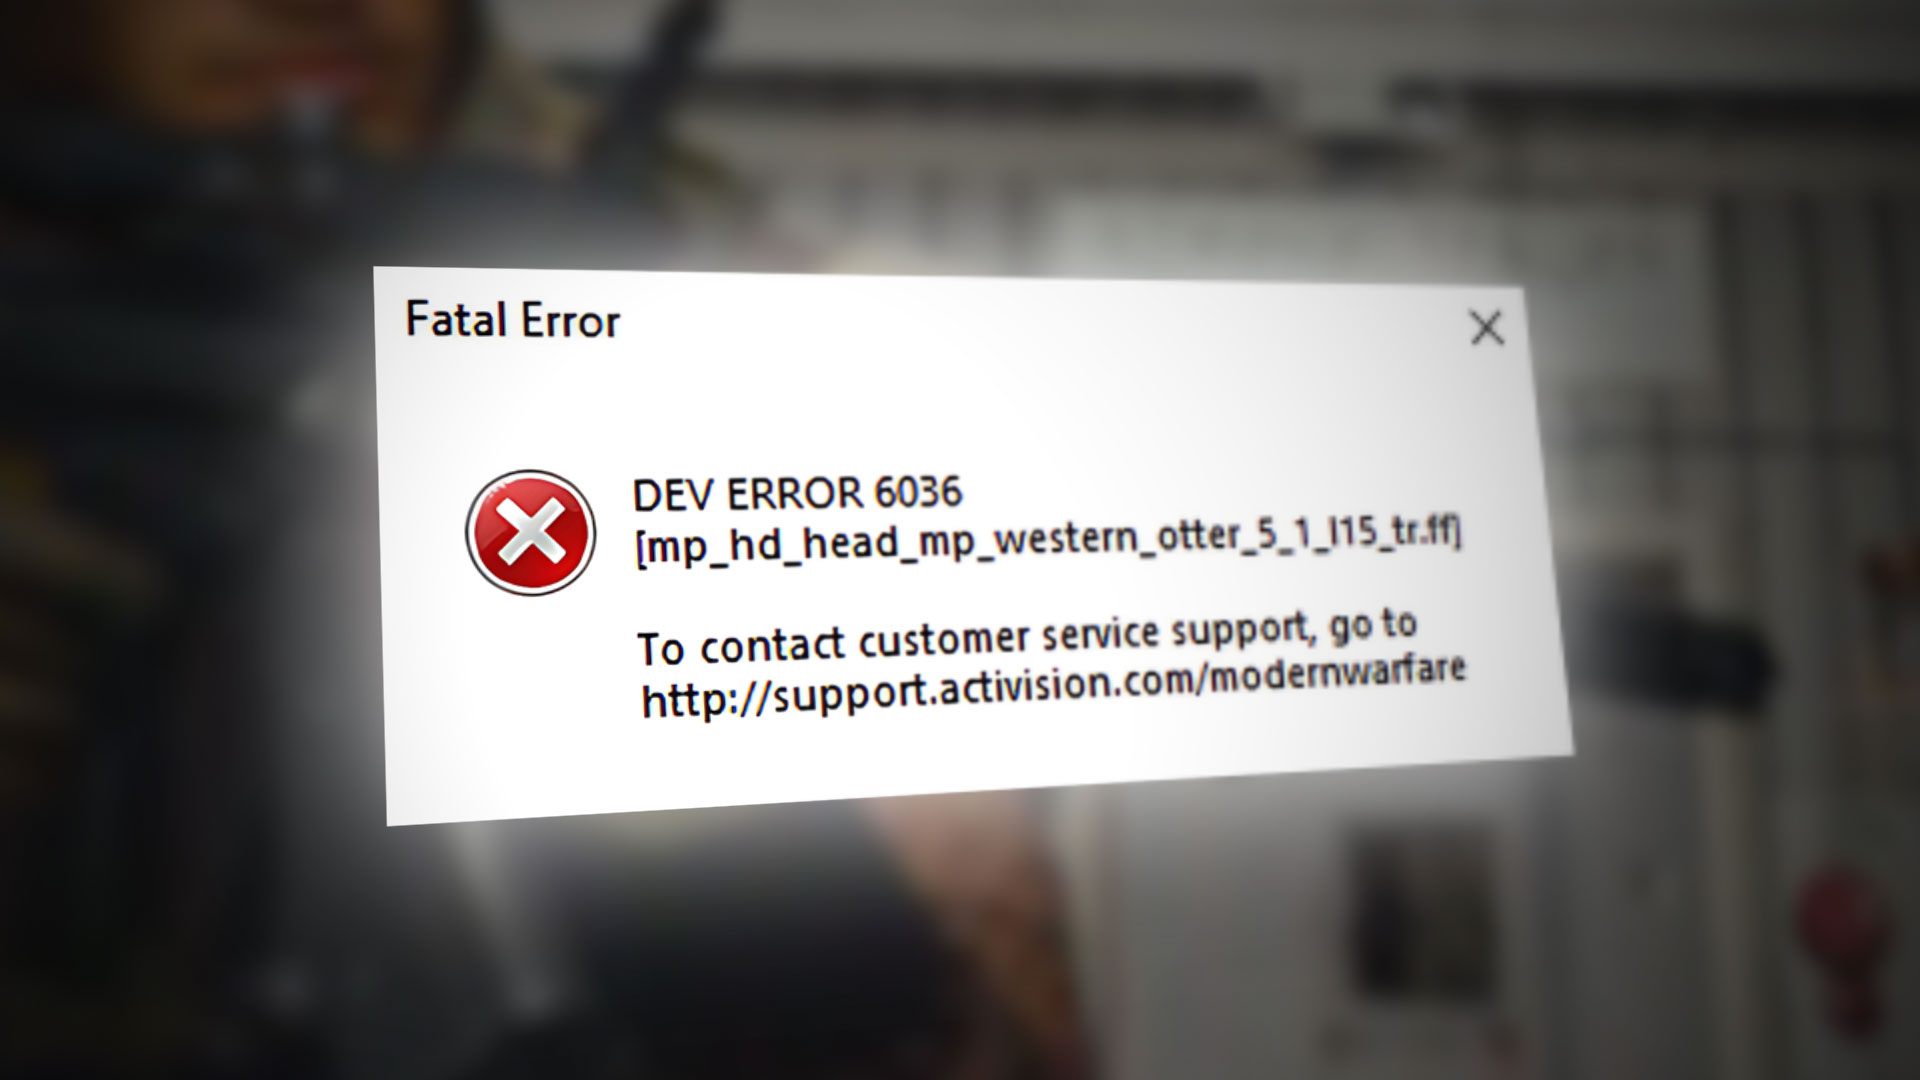 Launcher error fatal error failed to connect with local steam client process please make фото 39